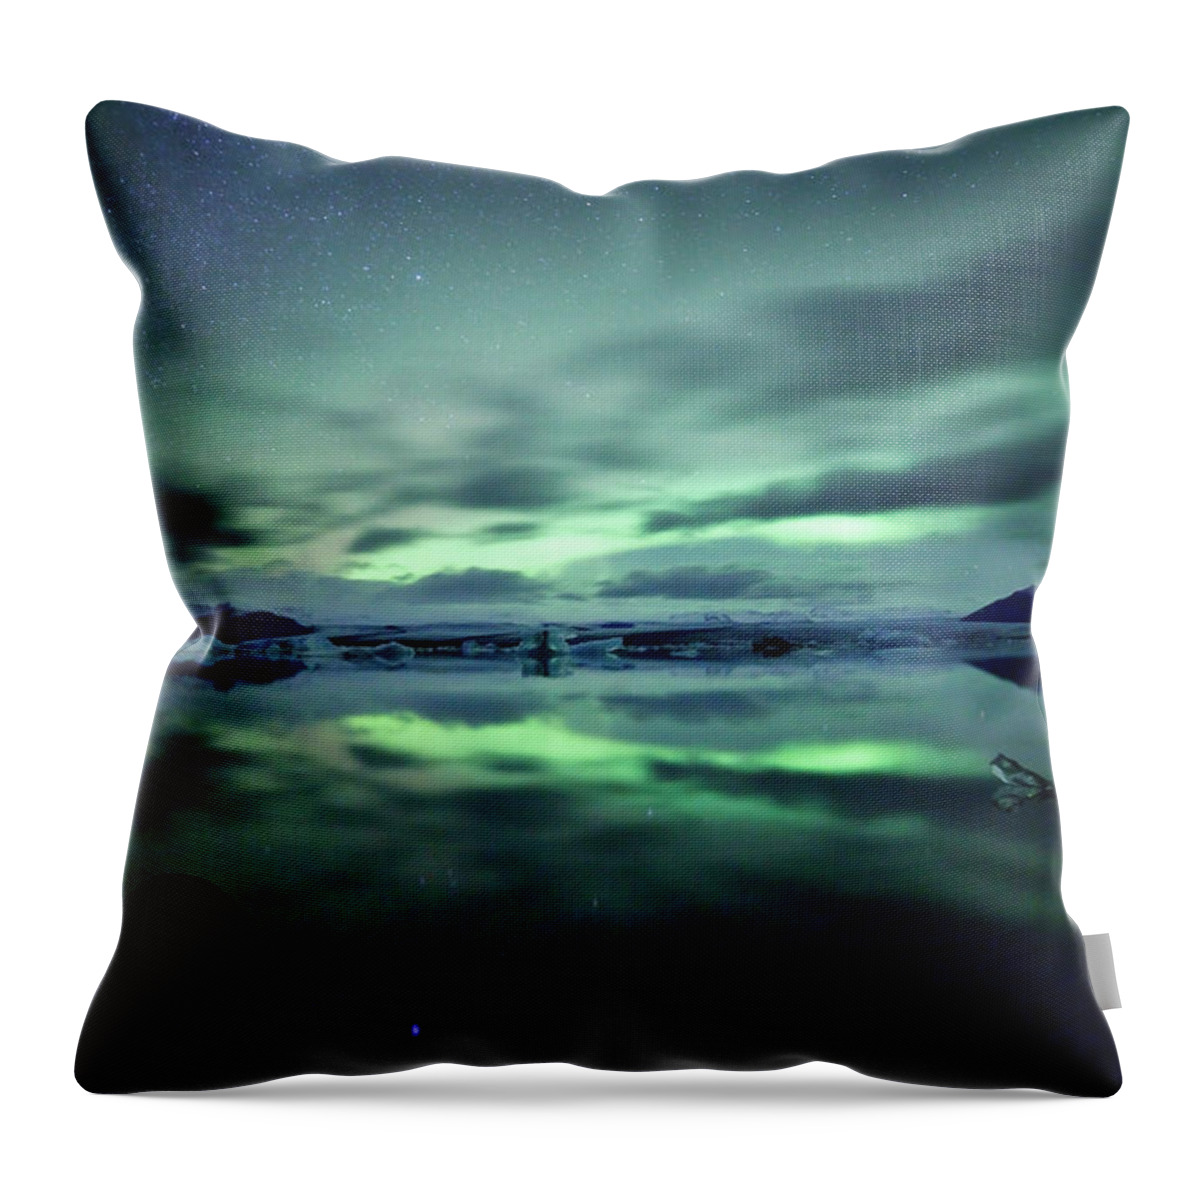 Outdoors Throw Pillow featuring the photograph Northern Lights Over Jokulsarlon by Matteo Colombo